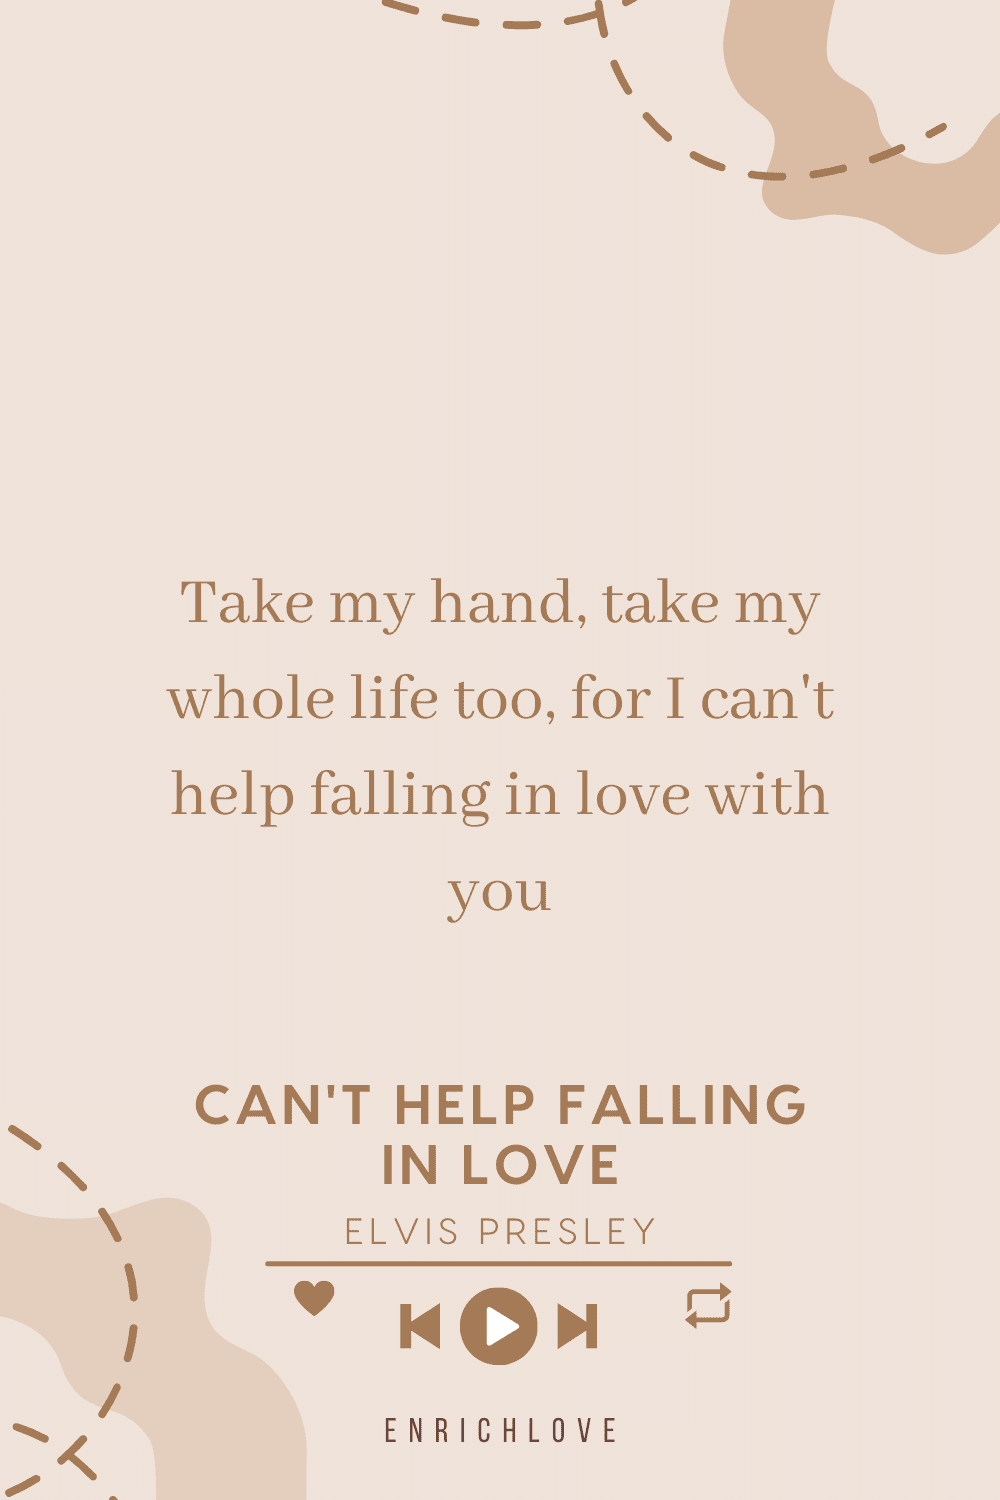 Take my hand, take my whole life too, for I can't help falling in love with you